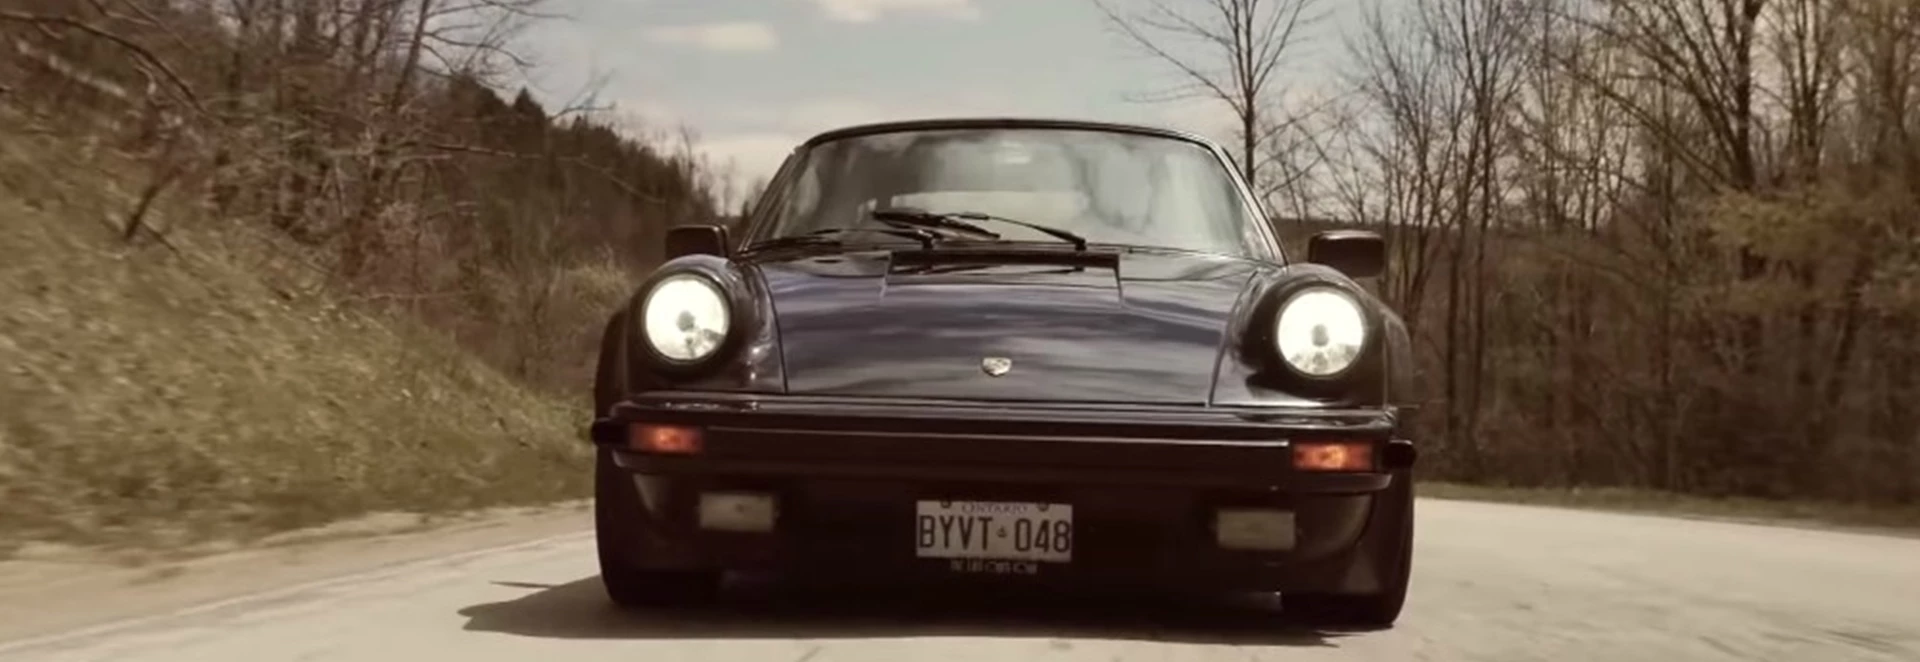 This 1976 Porsche 911 Turbo has covered an amazing 725,000 miles 